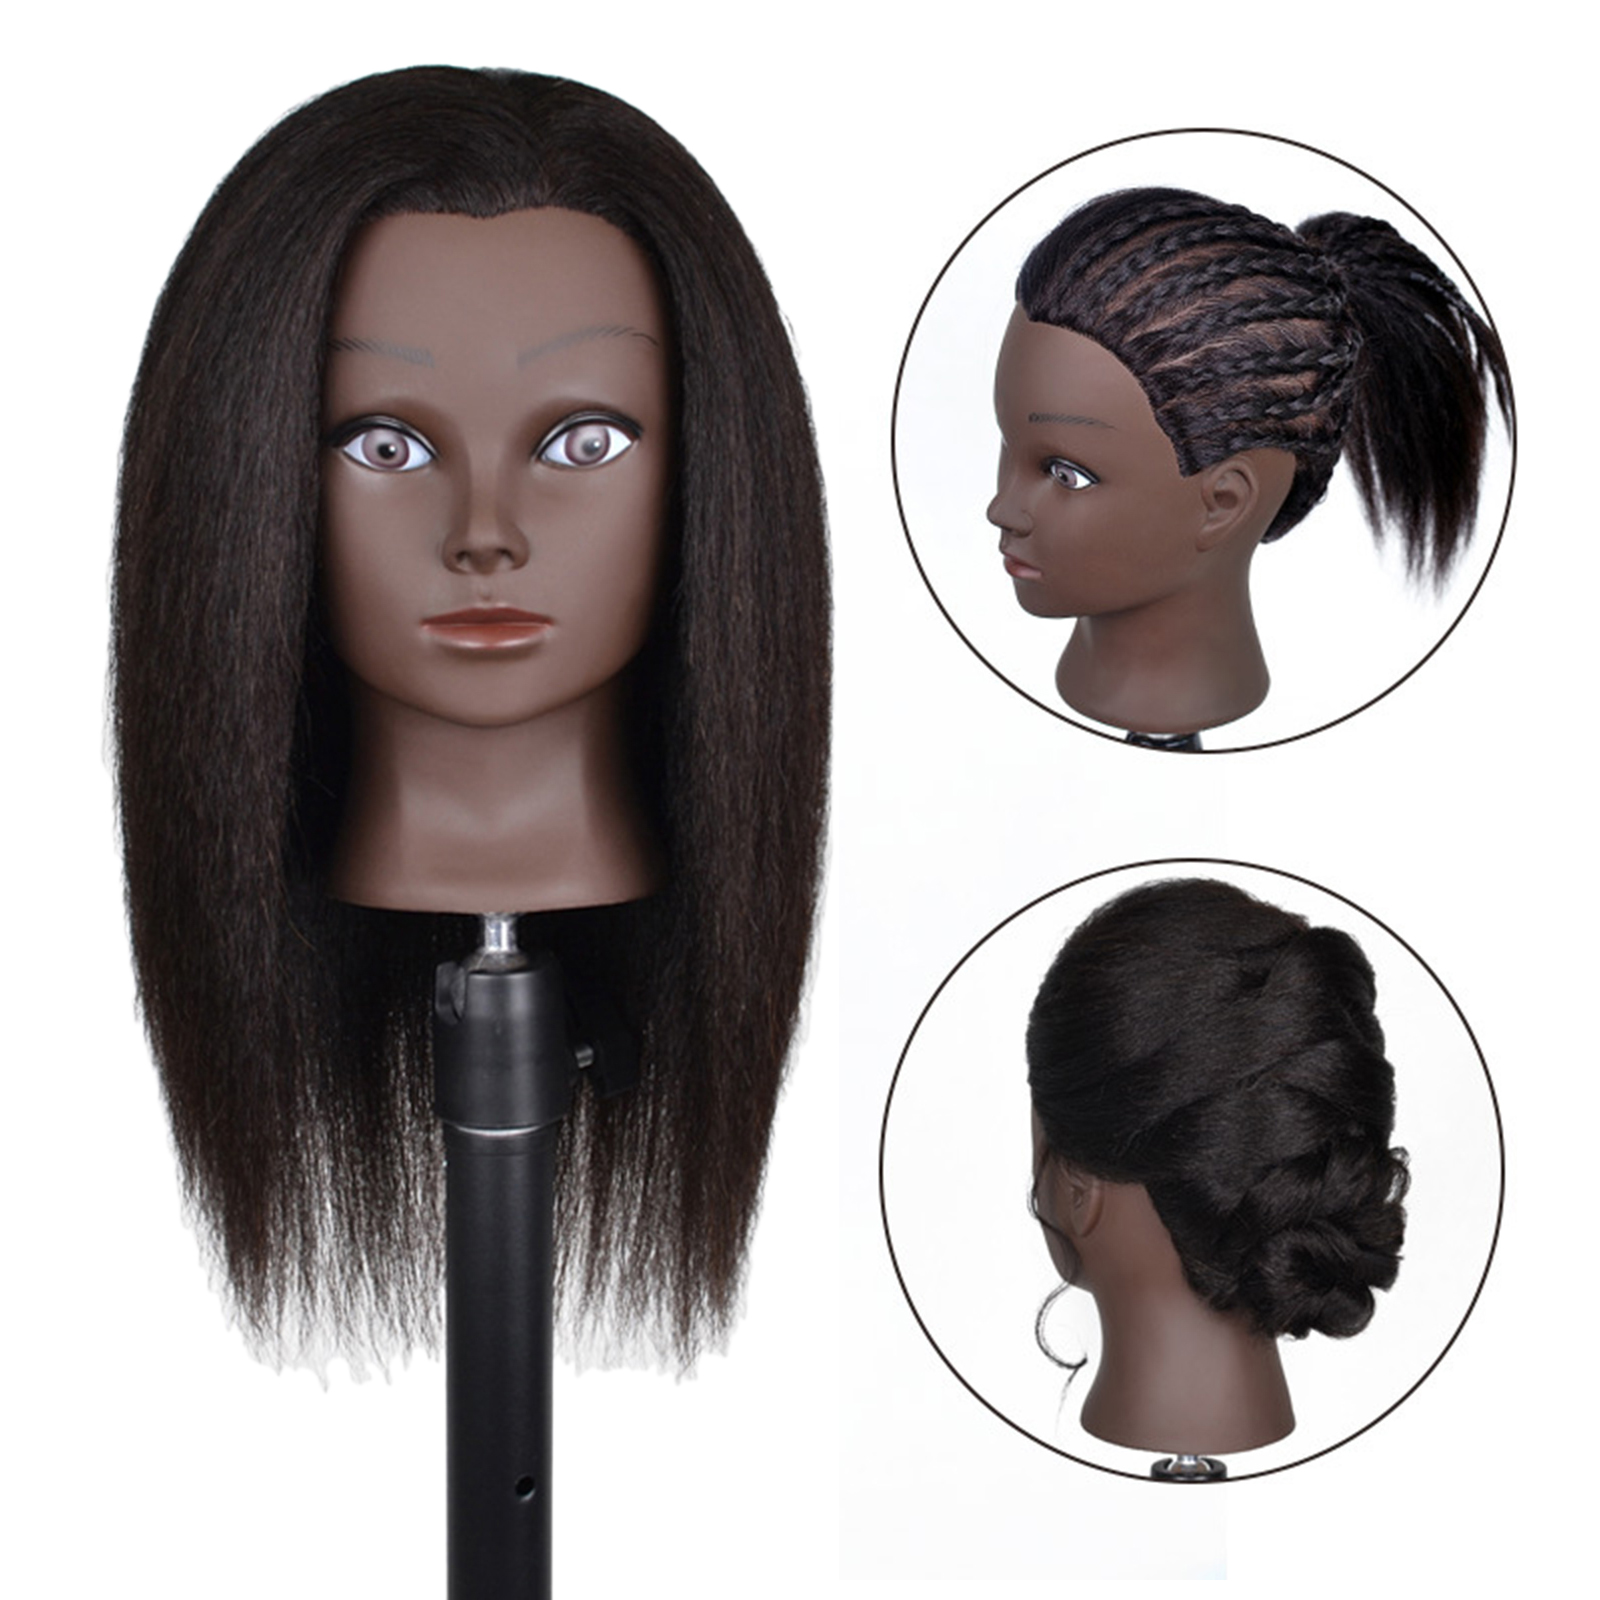 

100% Hair Professional Styling Mannequin Head For Braiding African Mannequin Practice Dummy Head For Hairdressing Training